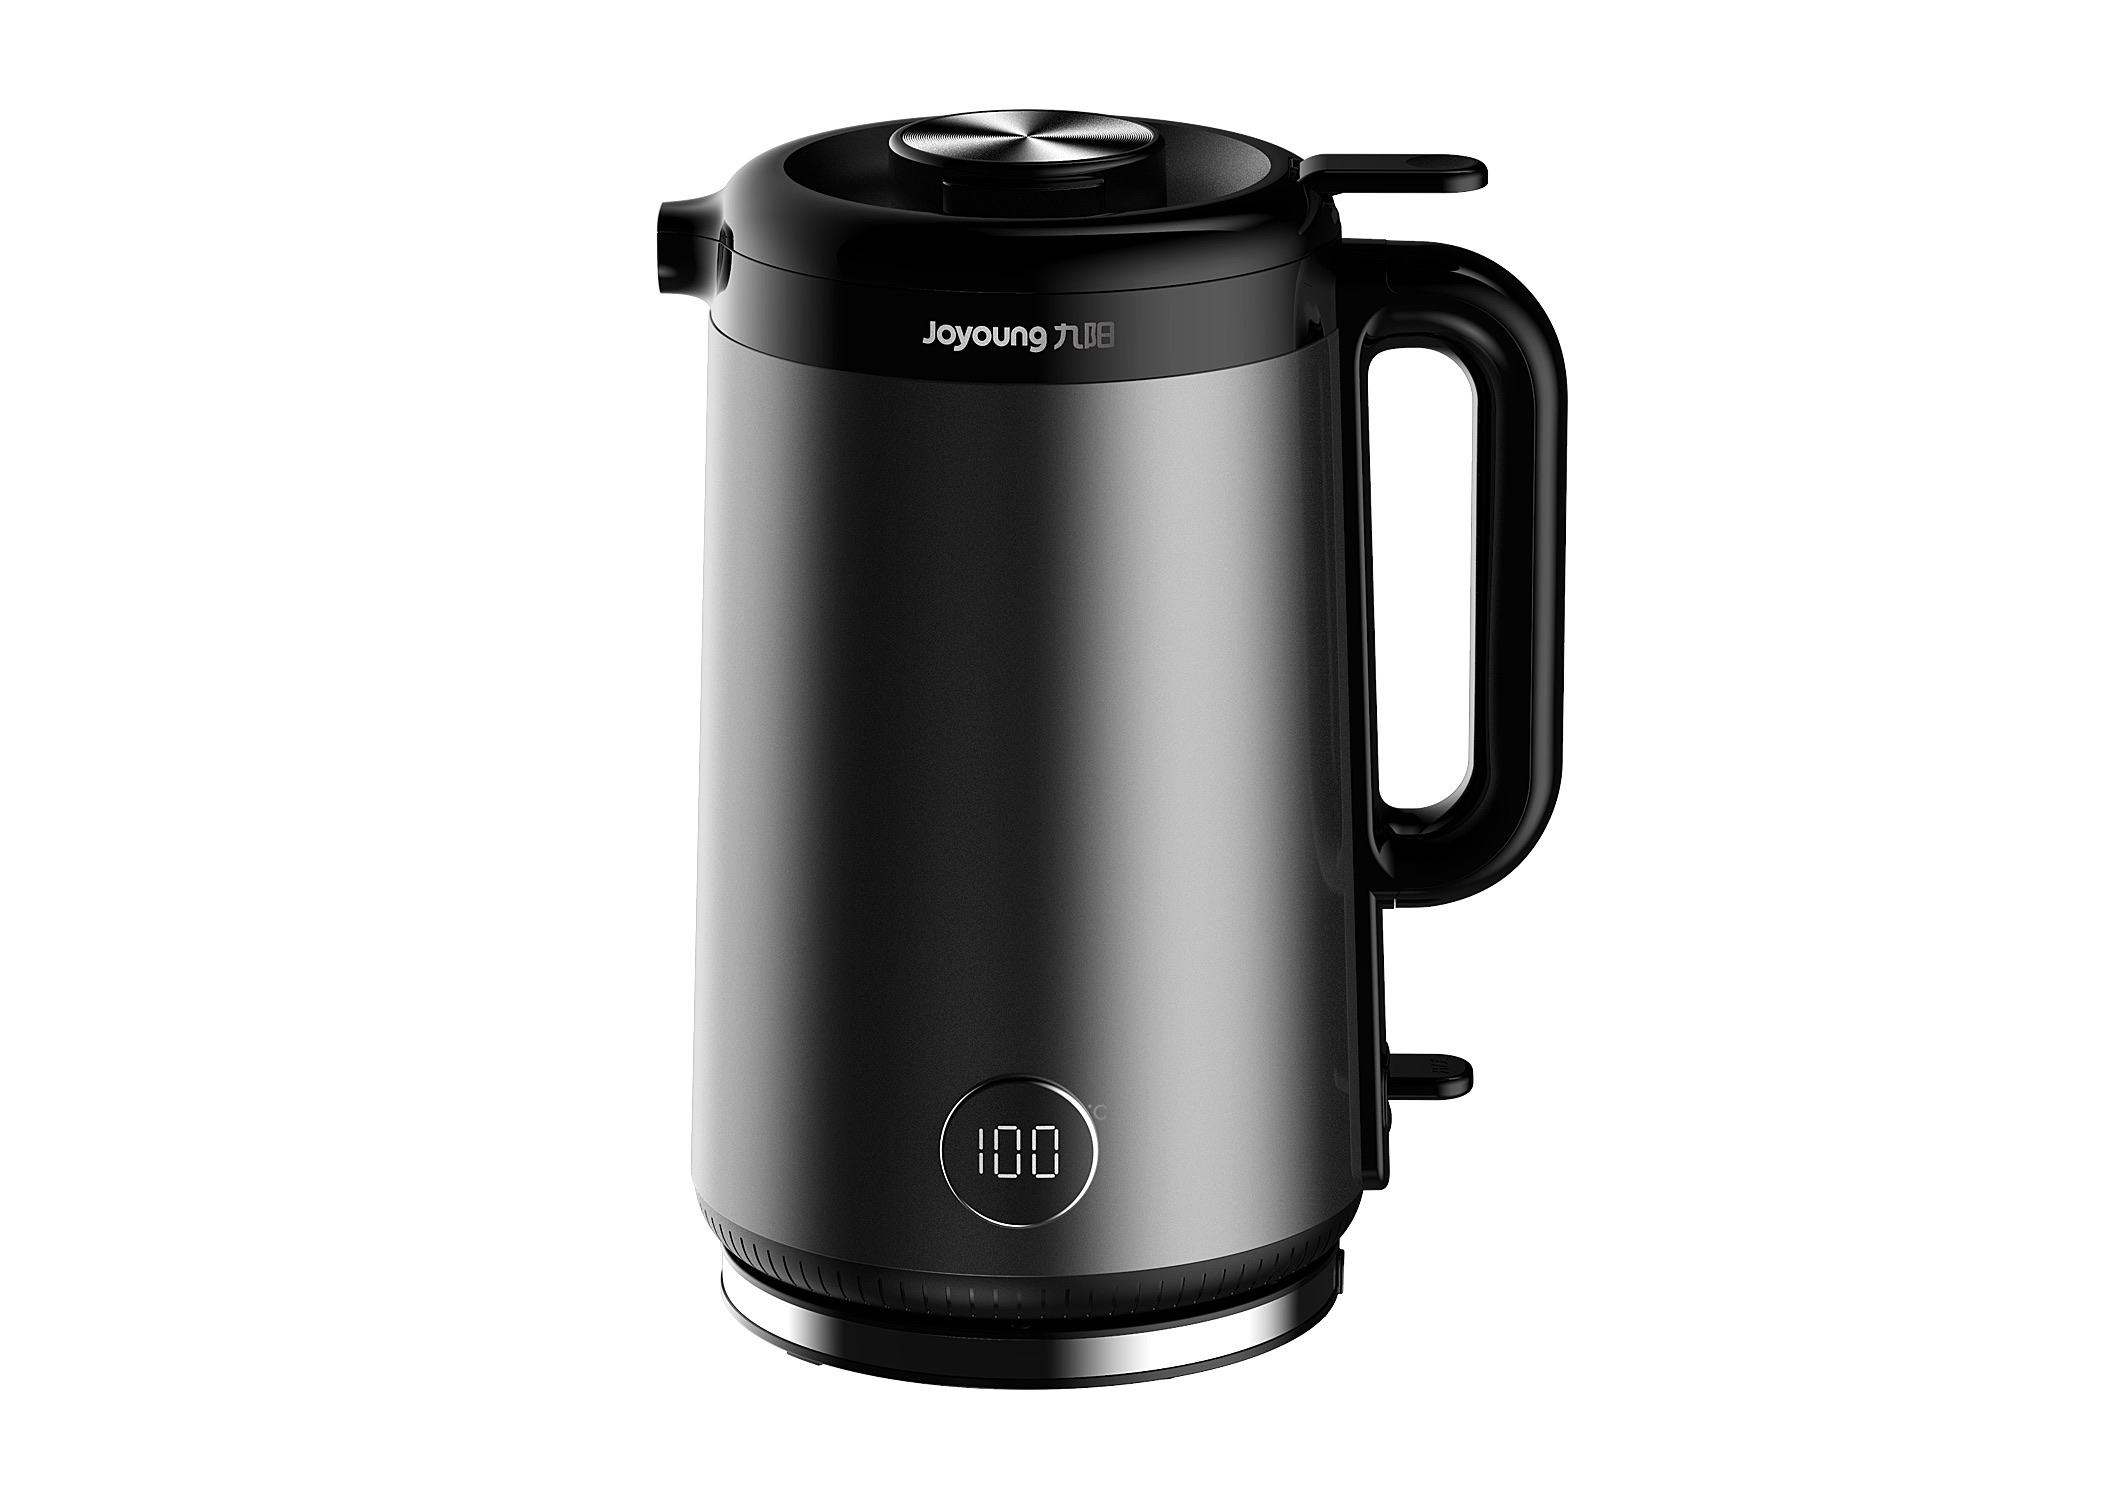 Dash Insulated Electric Kettle Cordless Hot Water Kettle - Black